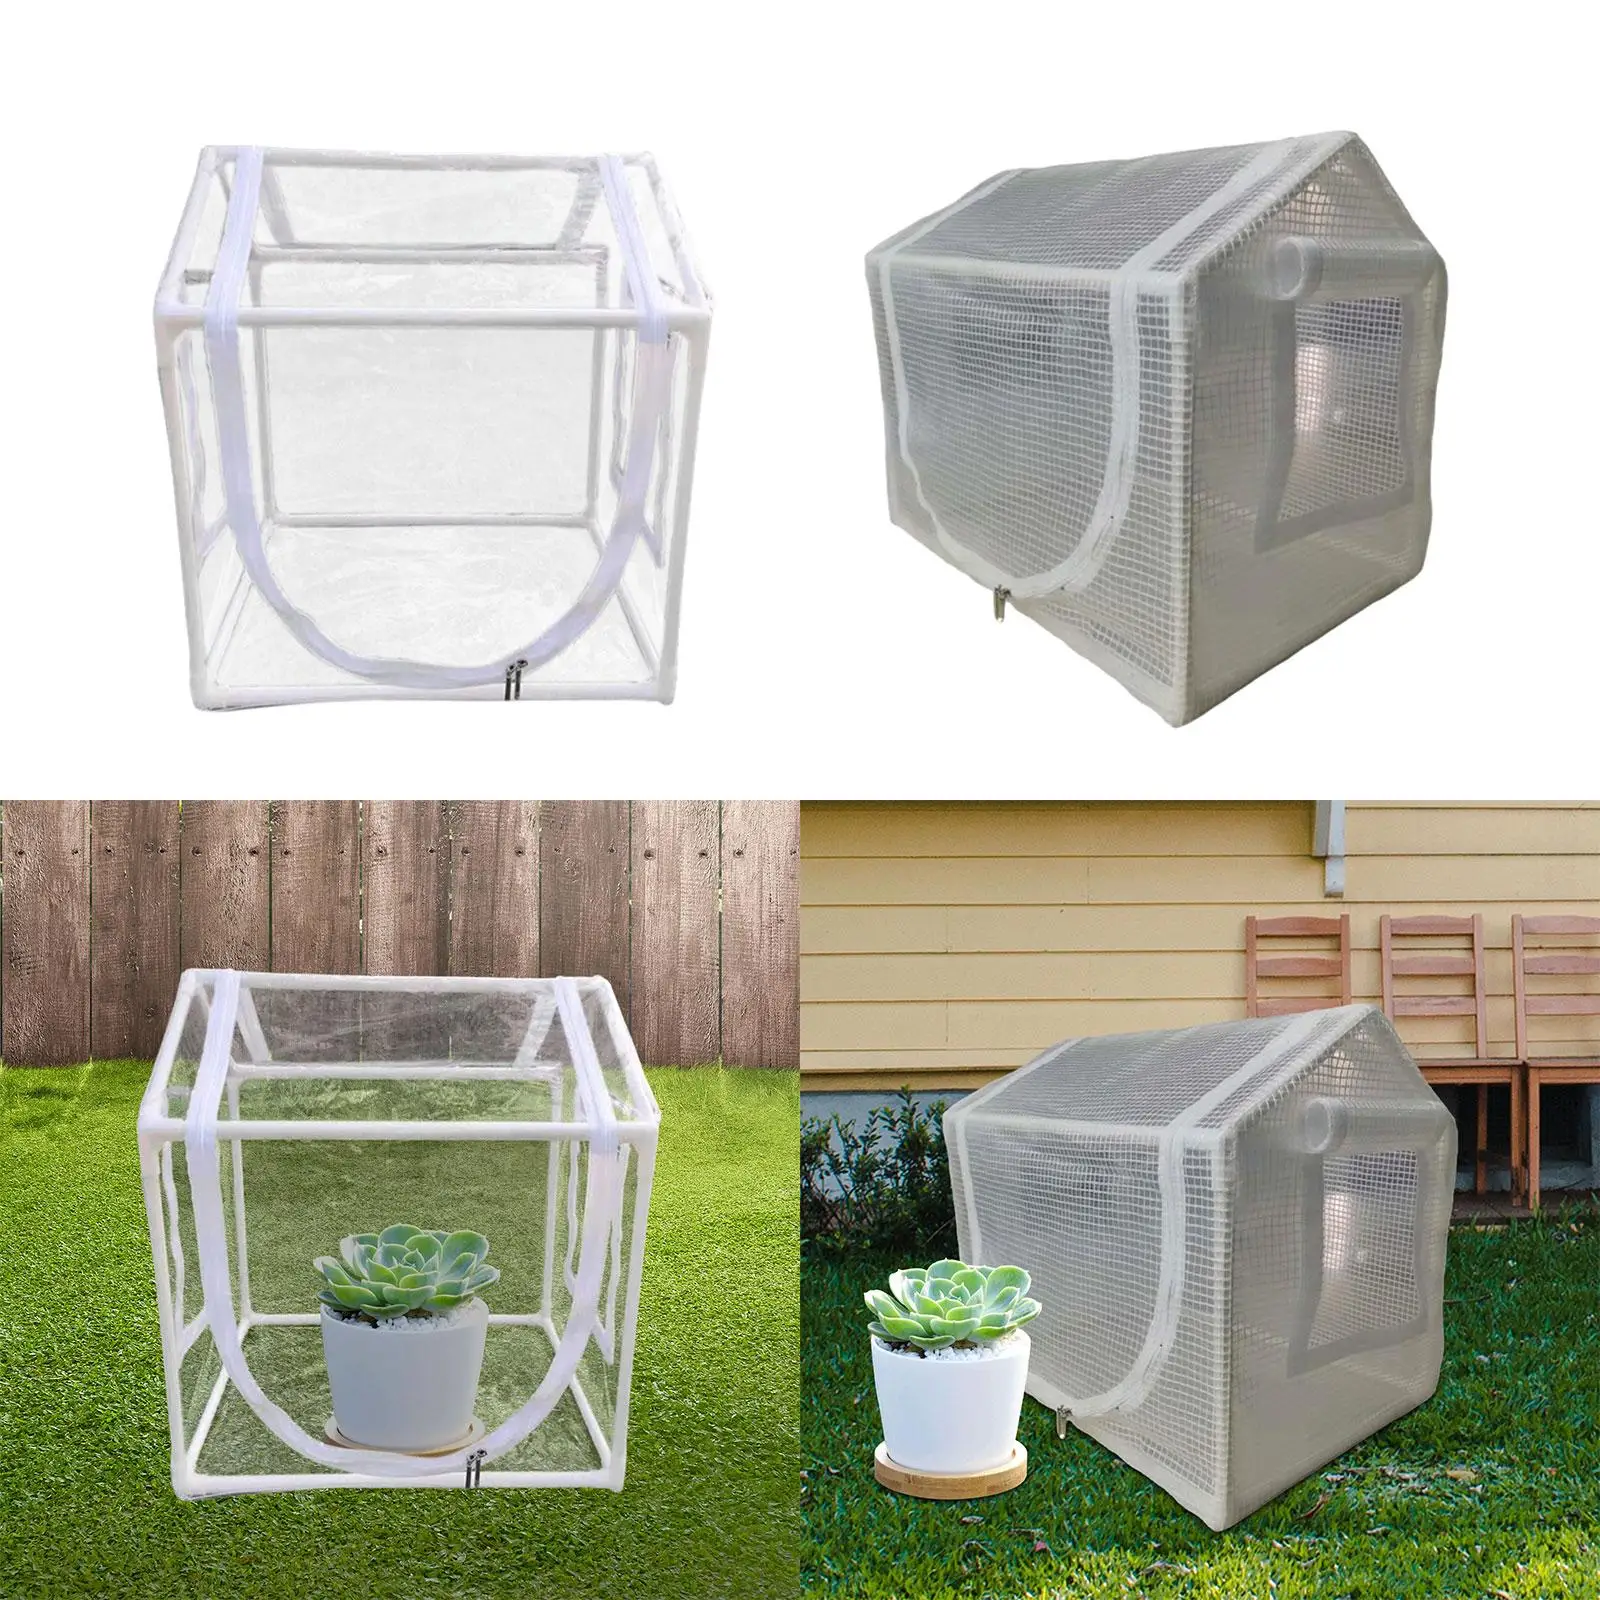 Still Air Box PVC Greenhouse Cover Reusable Easy Storage Yard Indoor Outdoor Planters Box Greenhouse Garden Garden Greenhouse